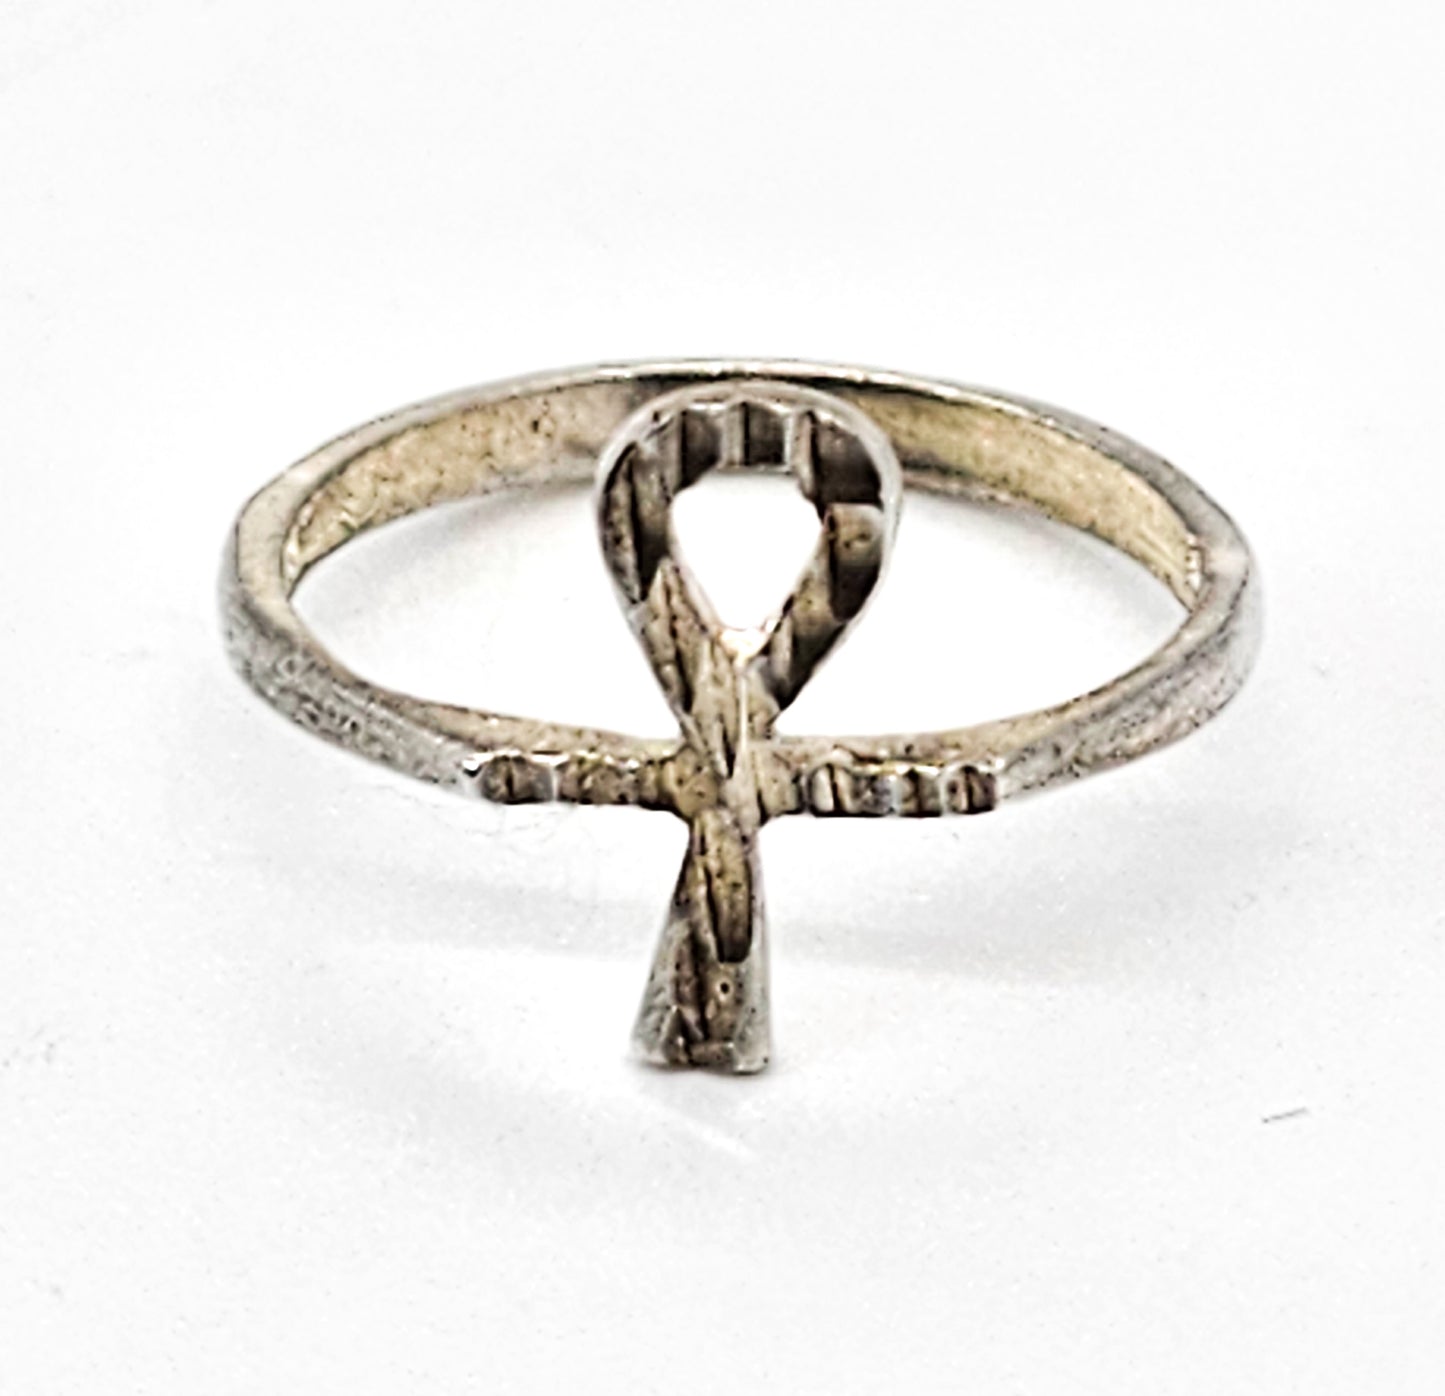 Ankh Key of Life Egyptian Revival vintage sterling silver etched ring size 5.5